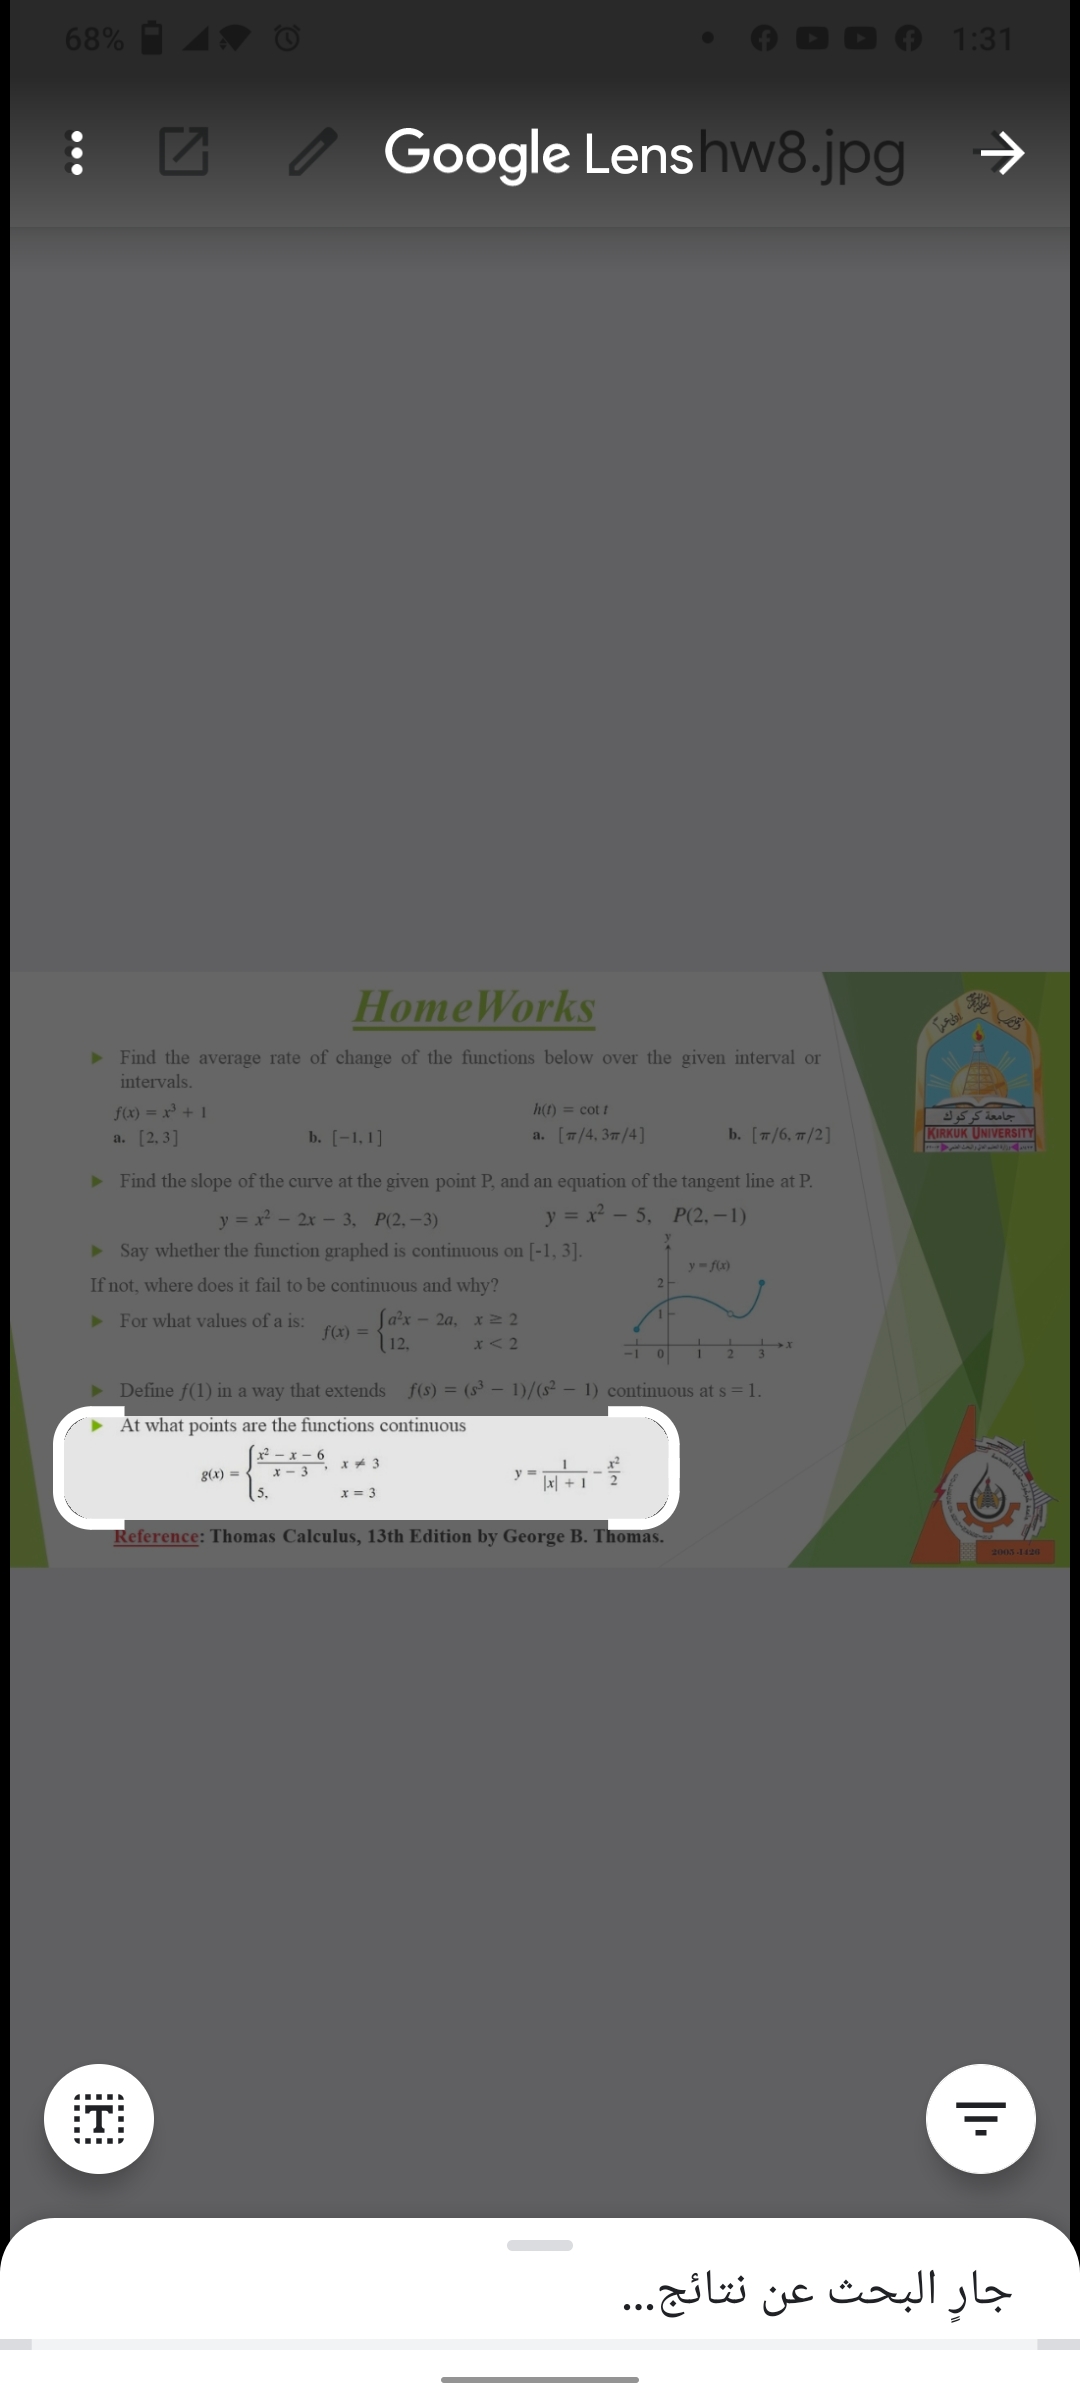 68%
1:31
Google Lens hw8.jpg
->
HomeWorks
> Find the average rate of change of the functions below over the given interval or
intervals.
f(x) = x³ + 1
h(t) = cot !
جامعة كركوك
KIRKUK UNIVERSITY
ALT1 6
a. [2,3]
b. [-1, 1]
a. [7/4, 37/4]
b. [т/6, п/2]
> Find the slope of the curve at the given point P, and an equation of the tangent line at P.
y = x - 5, P(2, – 1)
y = x - 2x – 3, P(2,-3)
> Say whether the function graphed is continuous on [-1, 3].
y- fx)
If not, where does it fail to be continuous and why?
Sa²x
fC) = 12.
> For what values of a is:
- 2a, x2 2
x<2
Define f(1) in a way that extends f(s) = (s³ – 1)/(s² – 1) continuous at s = 1.
At what points are the functions continuous
- x - 6
* - 3
(5.
g(x) =
y =
x = 3
Reference: Thomas Calculus, 13th Edition by George B. Thomas.
2005-1426
:T:
جارٍ البحث عن نتائج. . .
•..
